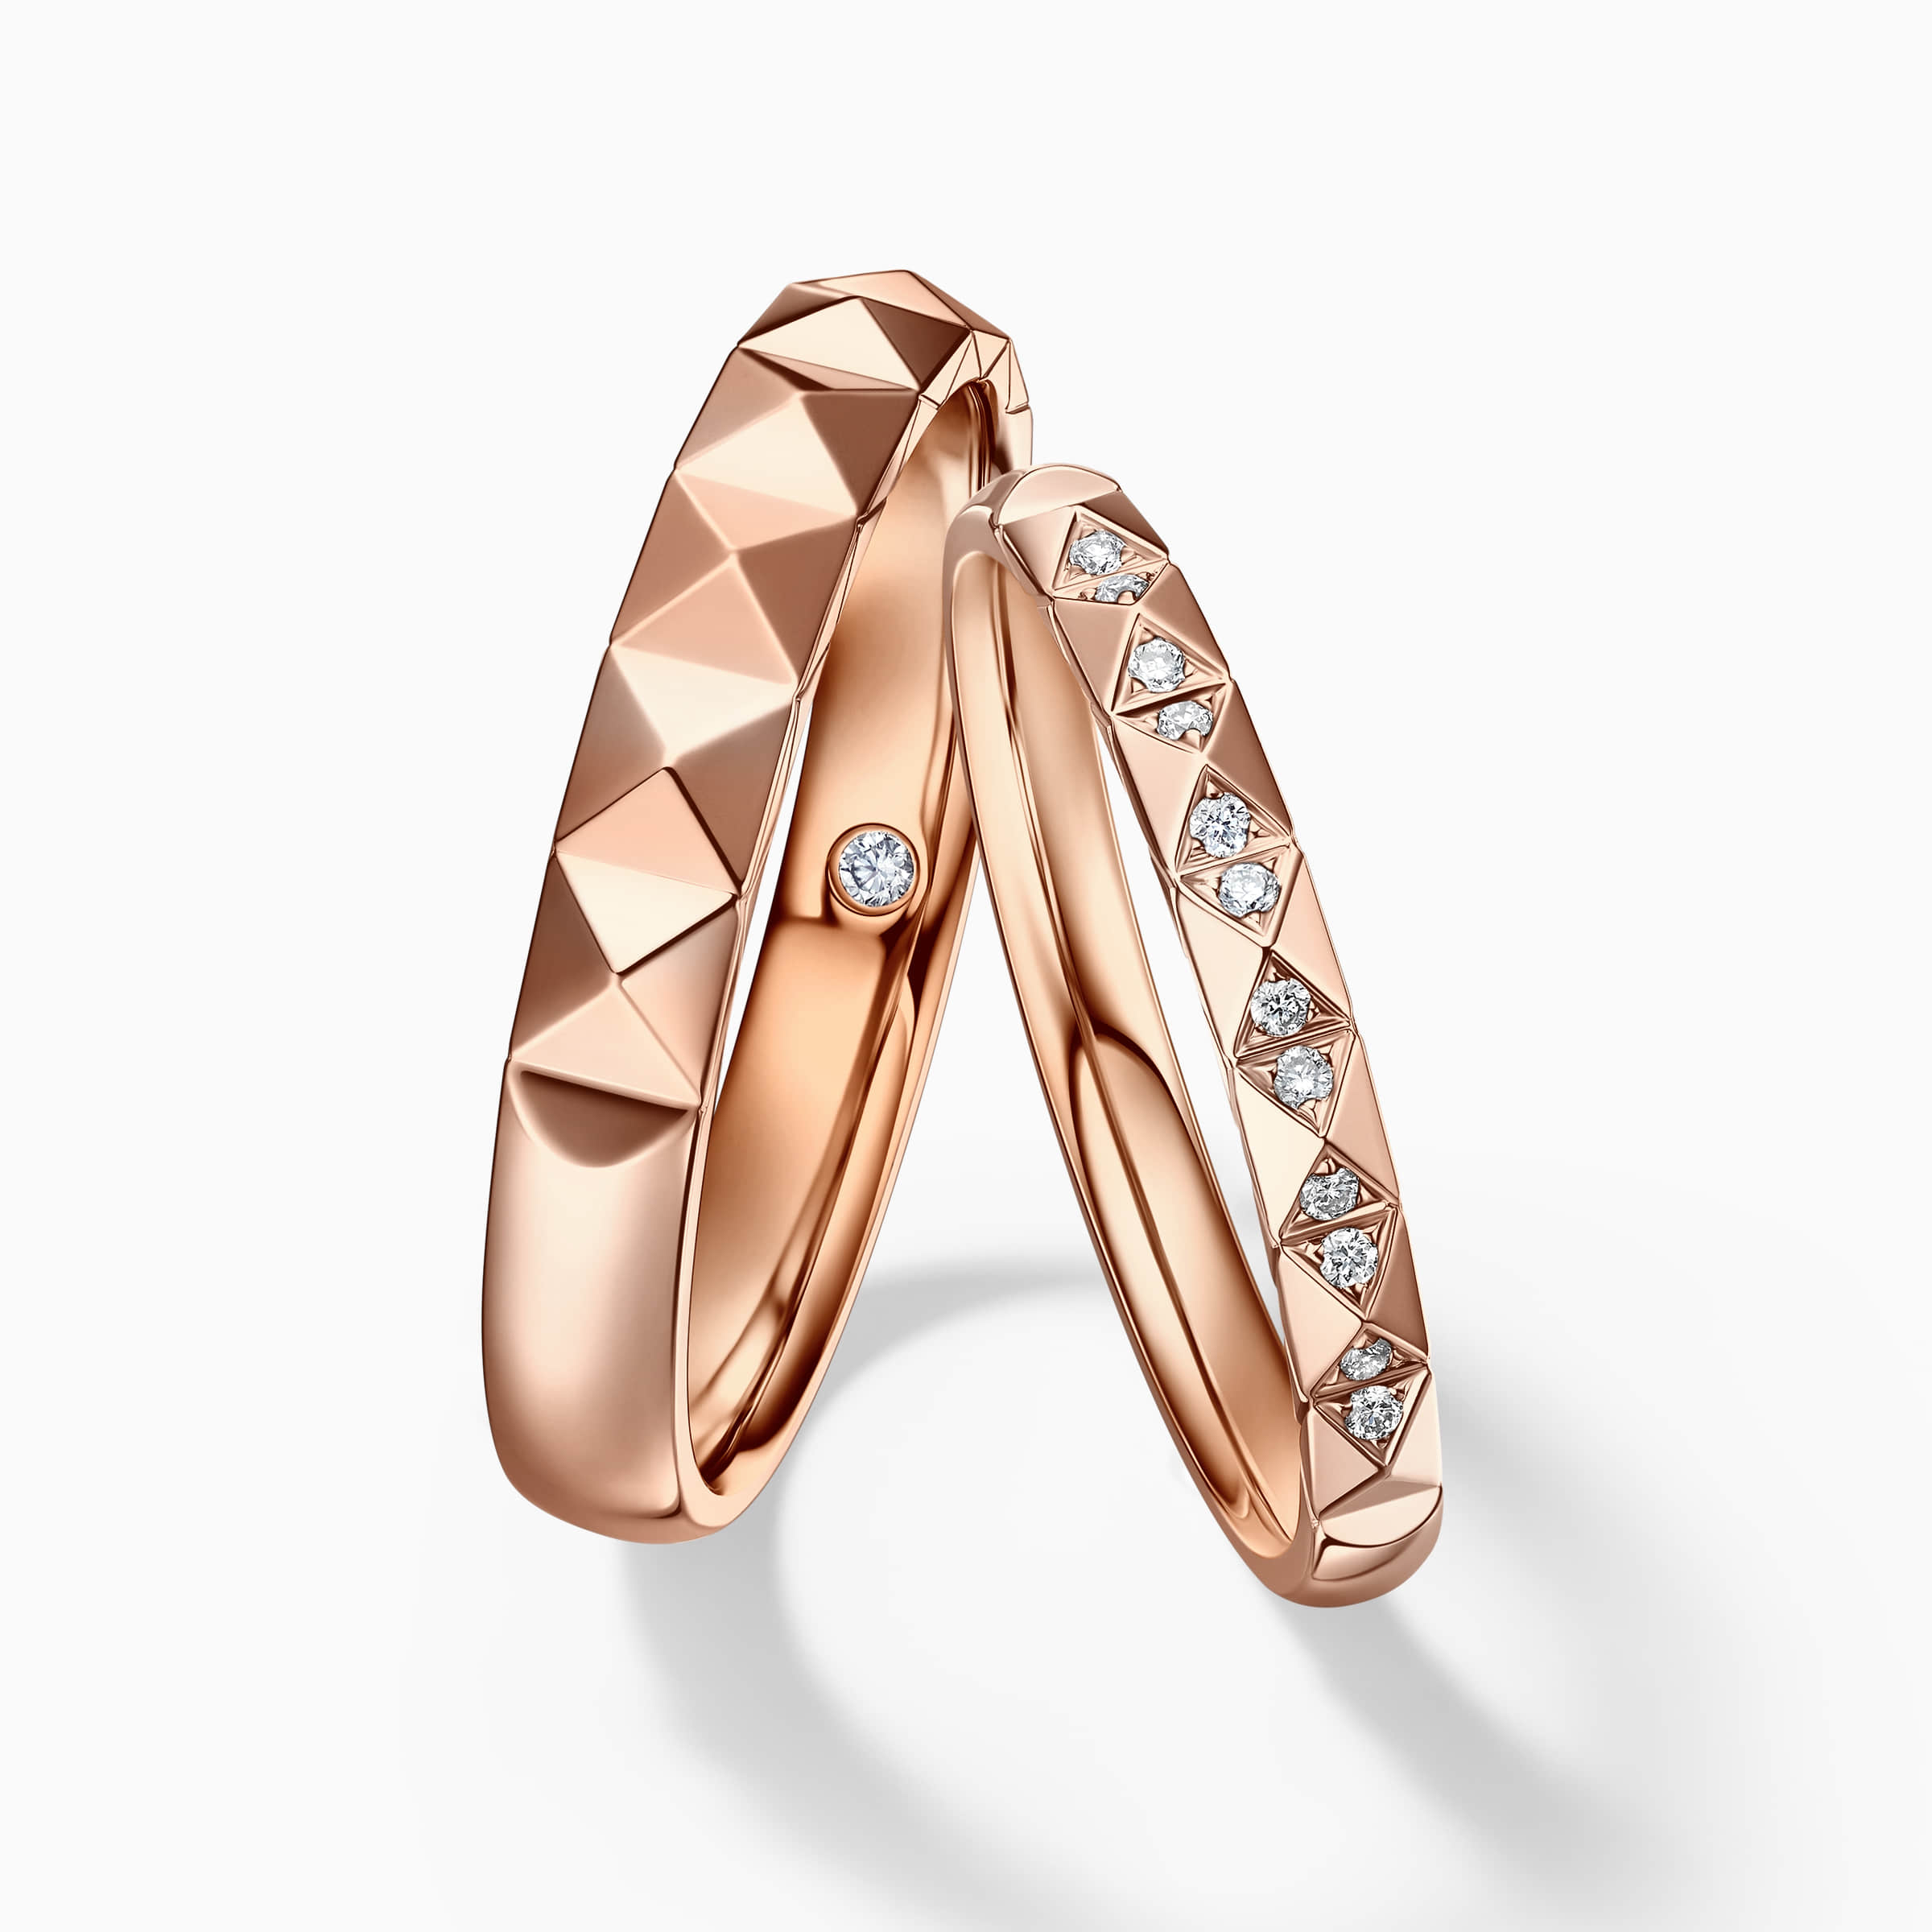 Darry Ring modern wedding band sets in rose gold